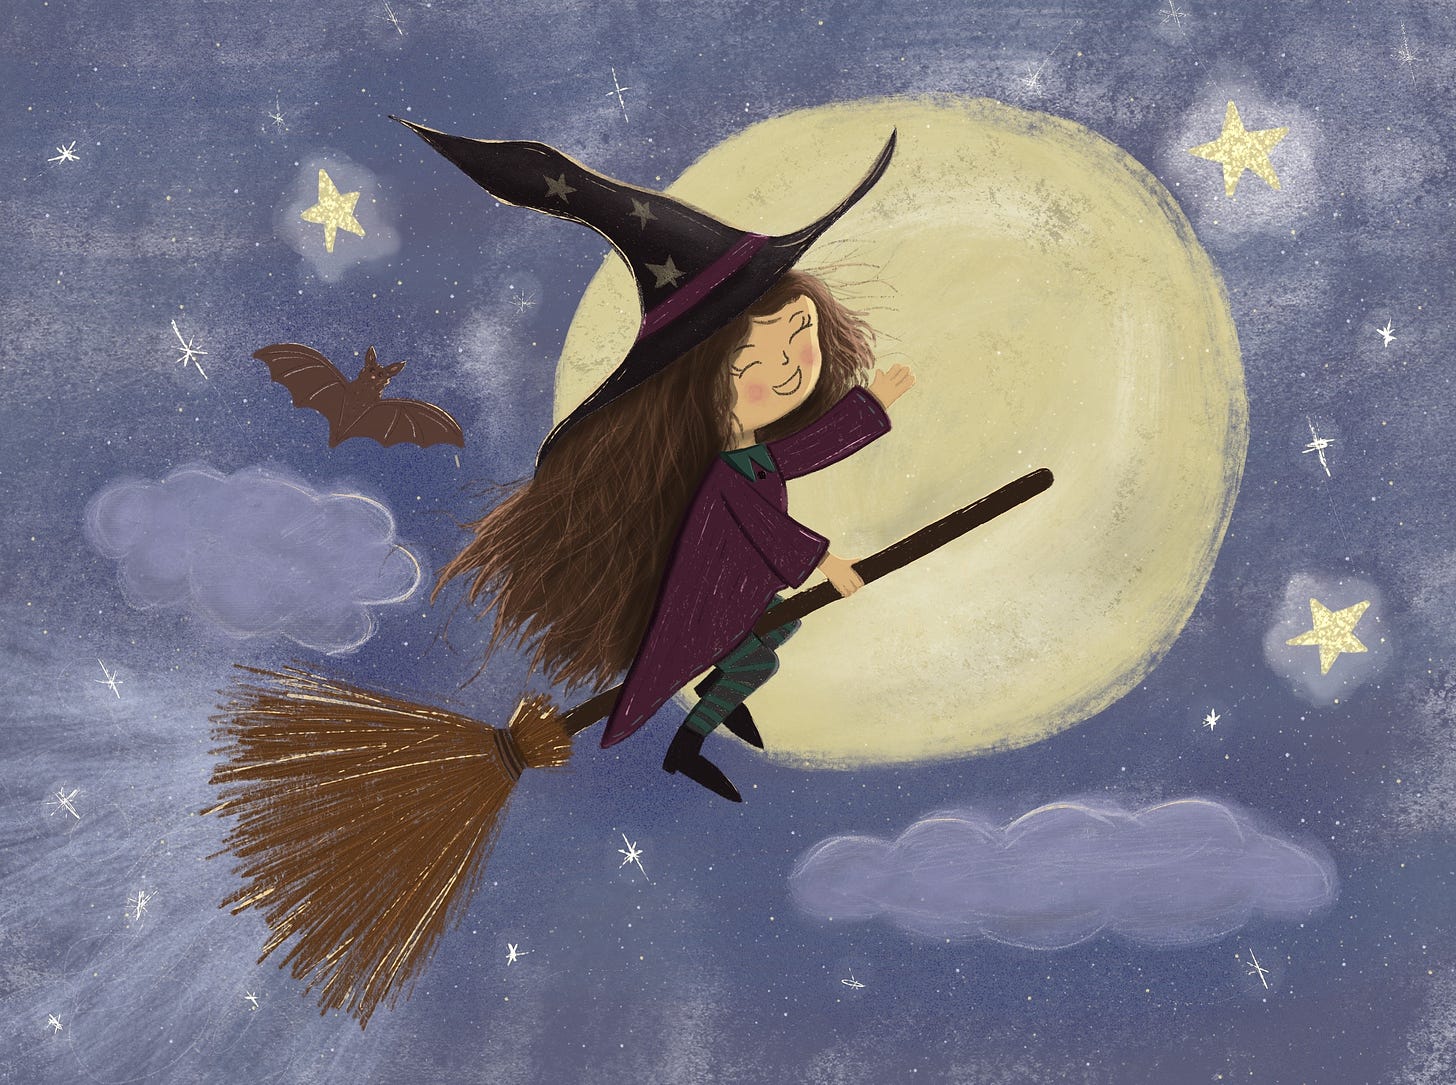 Drawing of a witch flying on a broom with the moon and stars as a backdrop and a bat flying alonside her.